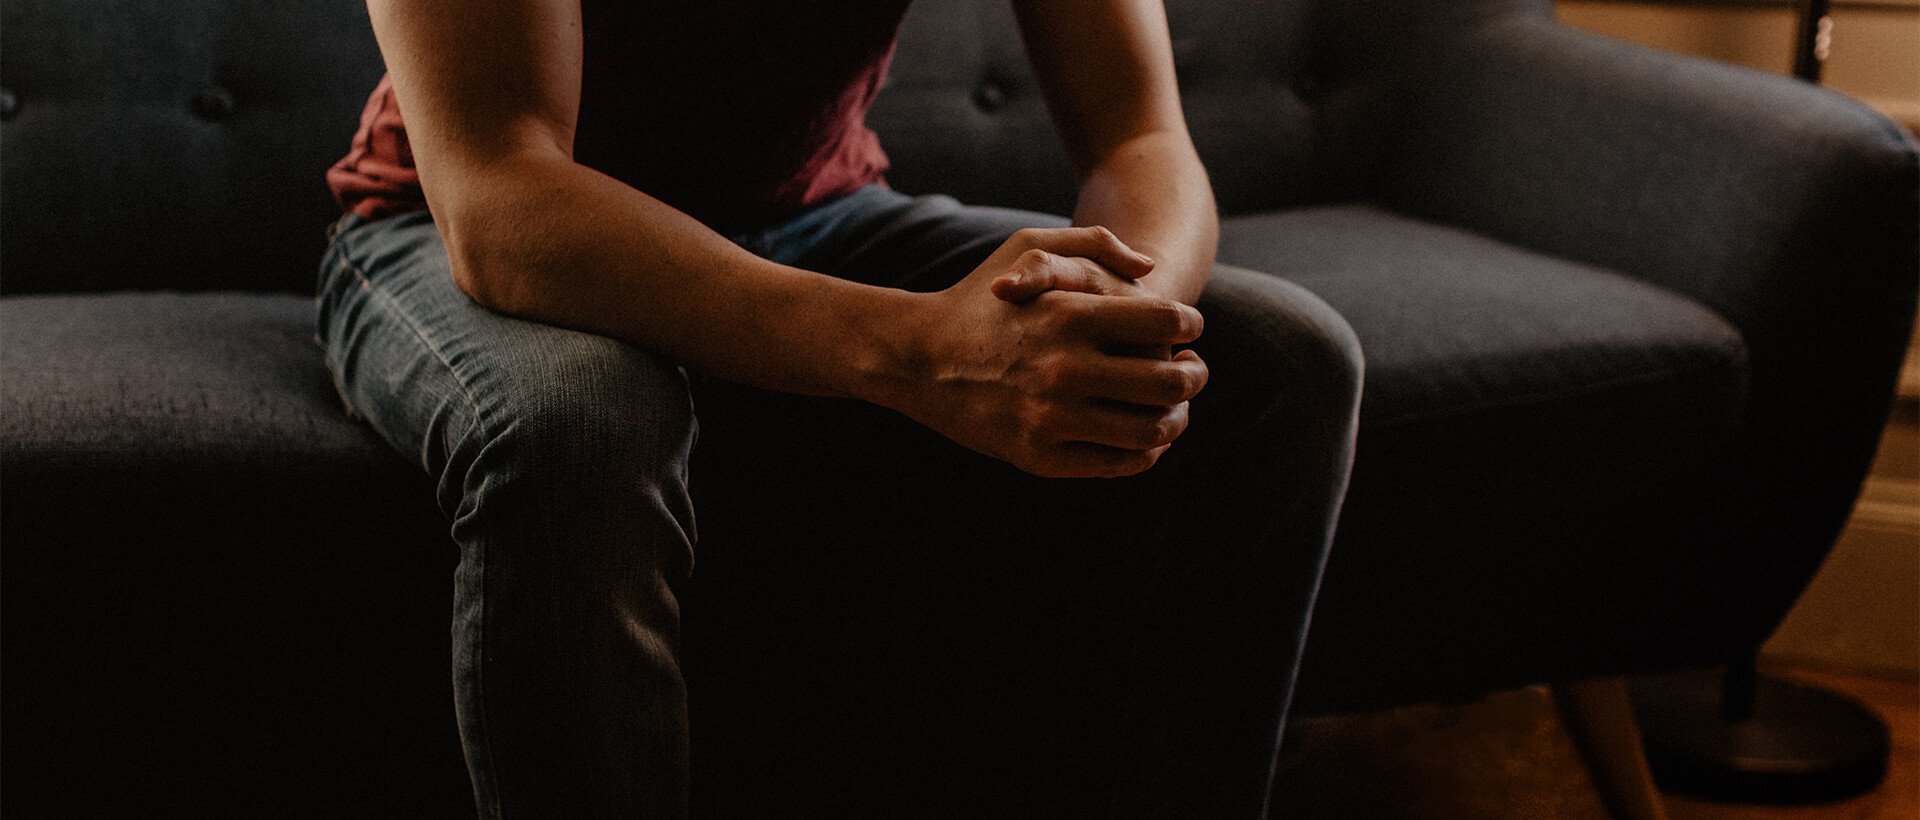 a person sitting on a couch with their hands clasped.